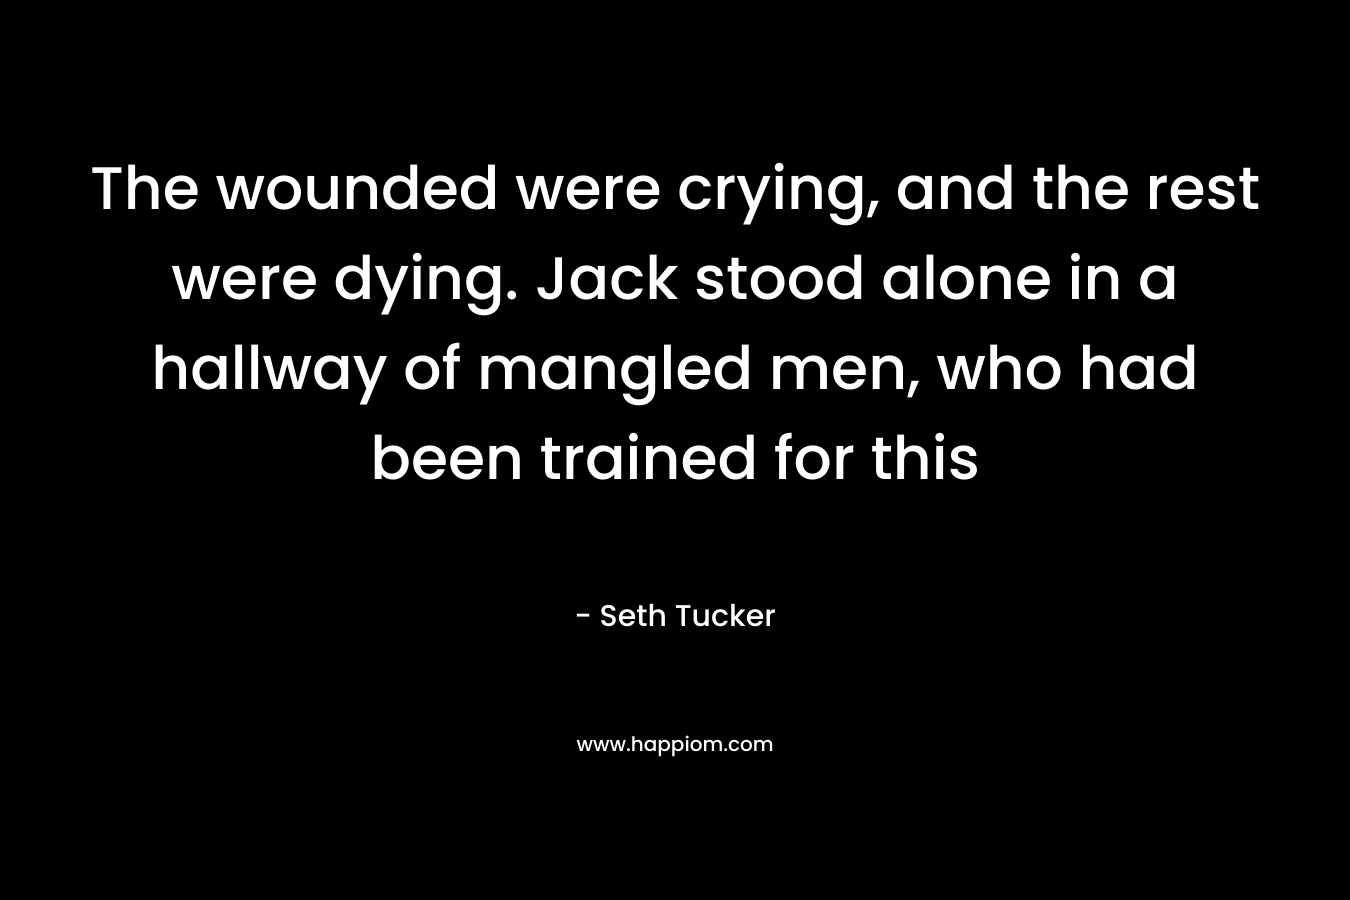 The wounded were crying, and the rest were dying. Jack stood alone in a hallway of mangled men, who had been trained for this – Seth Tucker